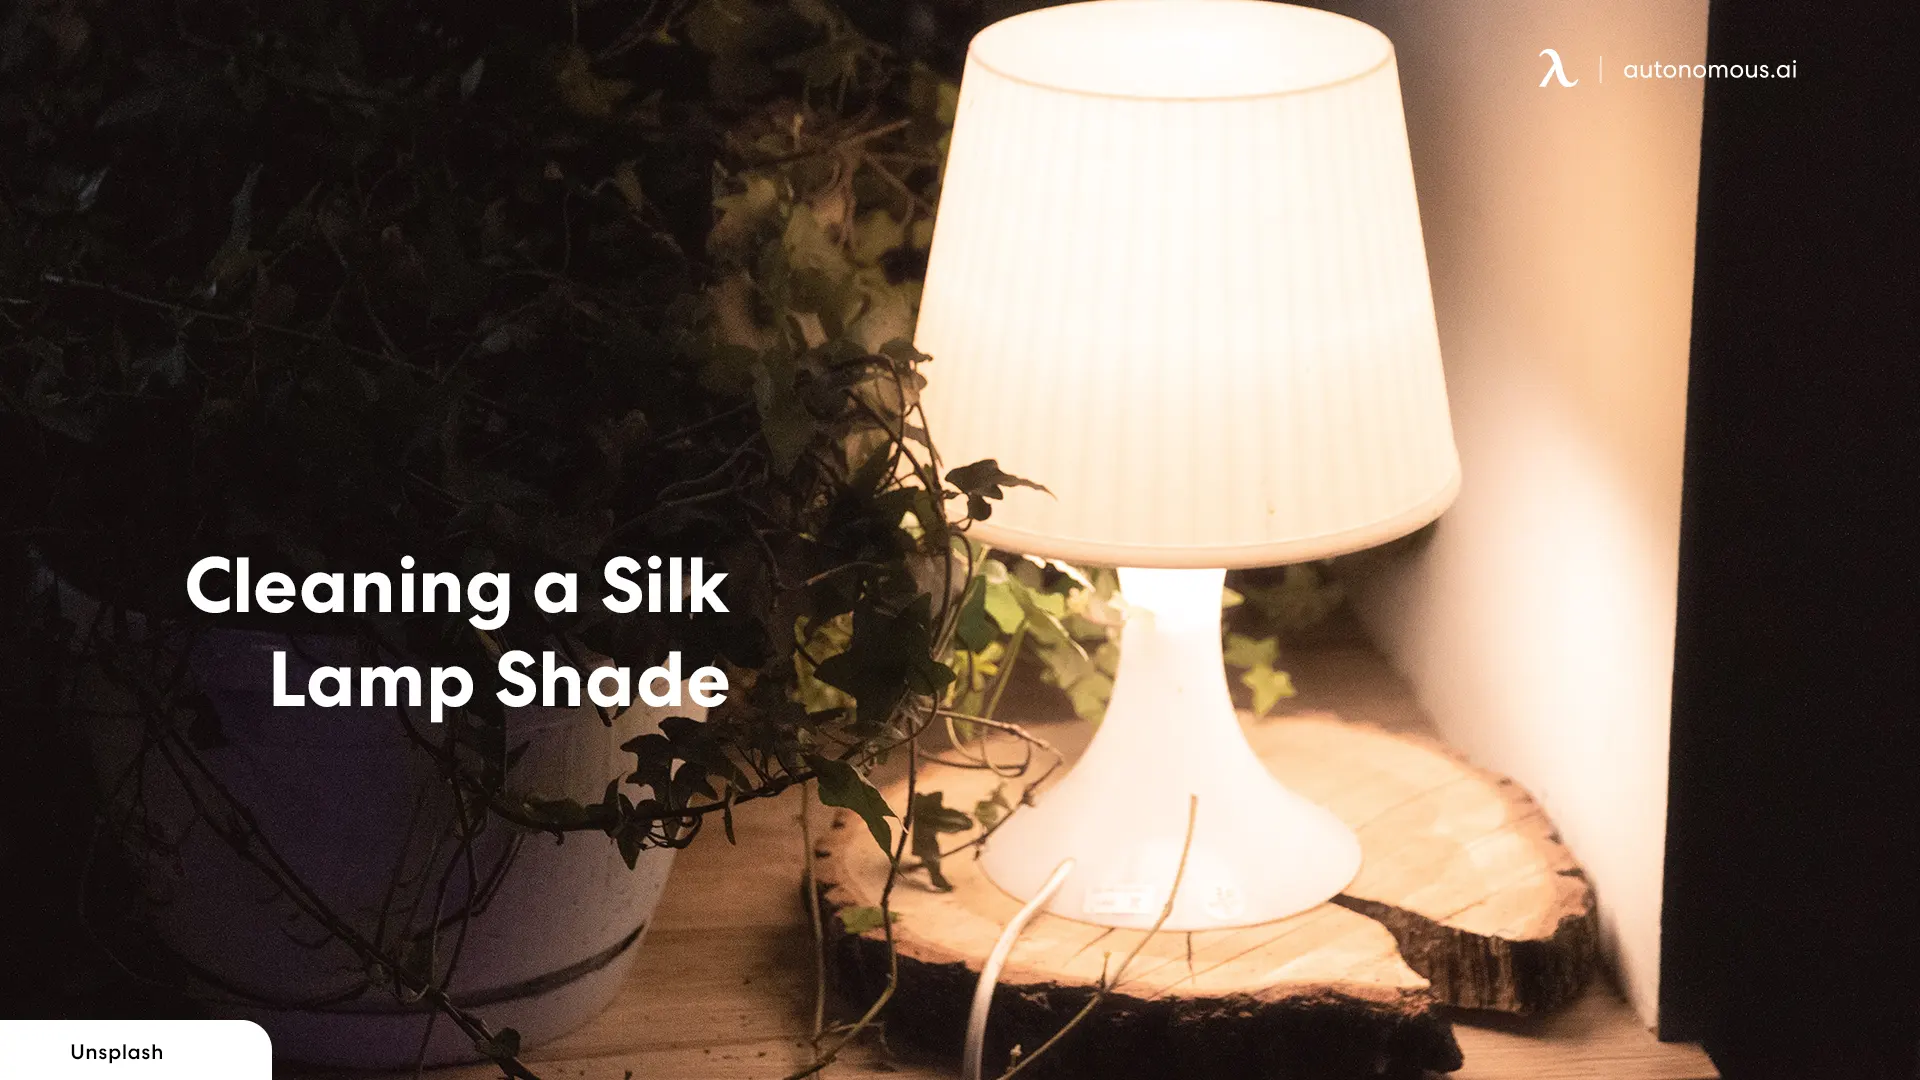 Cleaning a Silk Lamp Shade